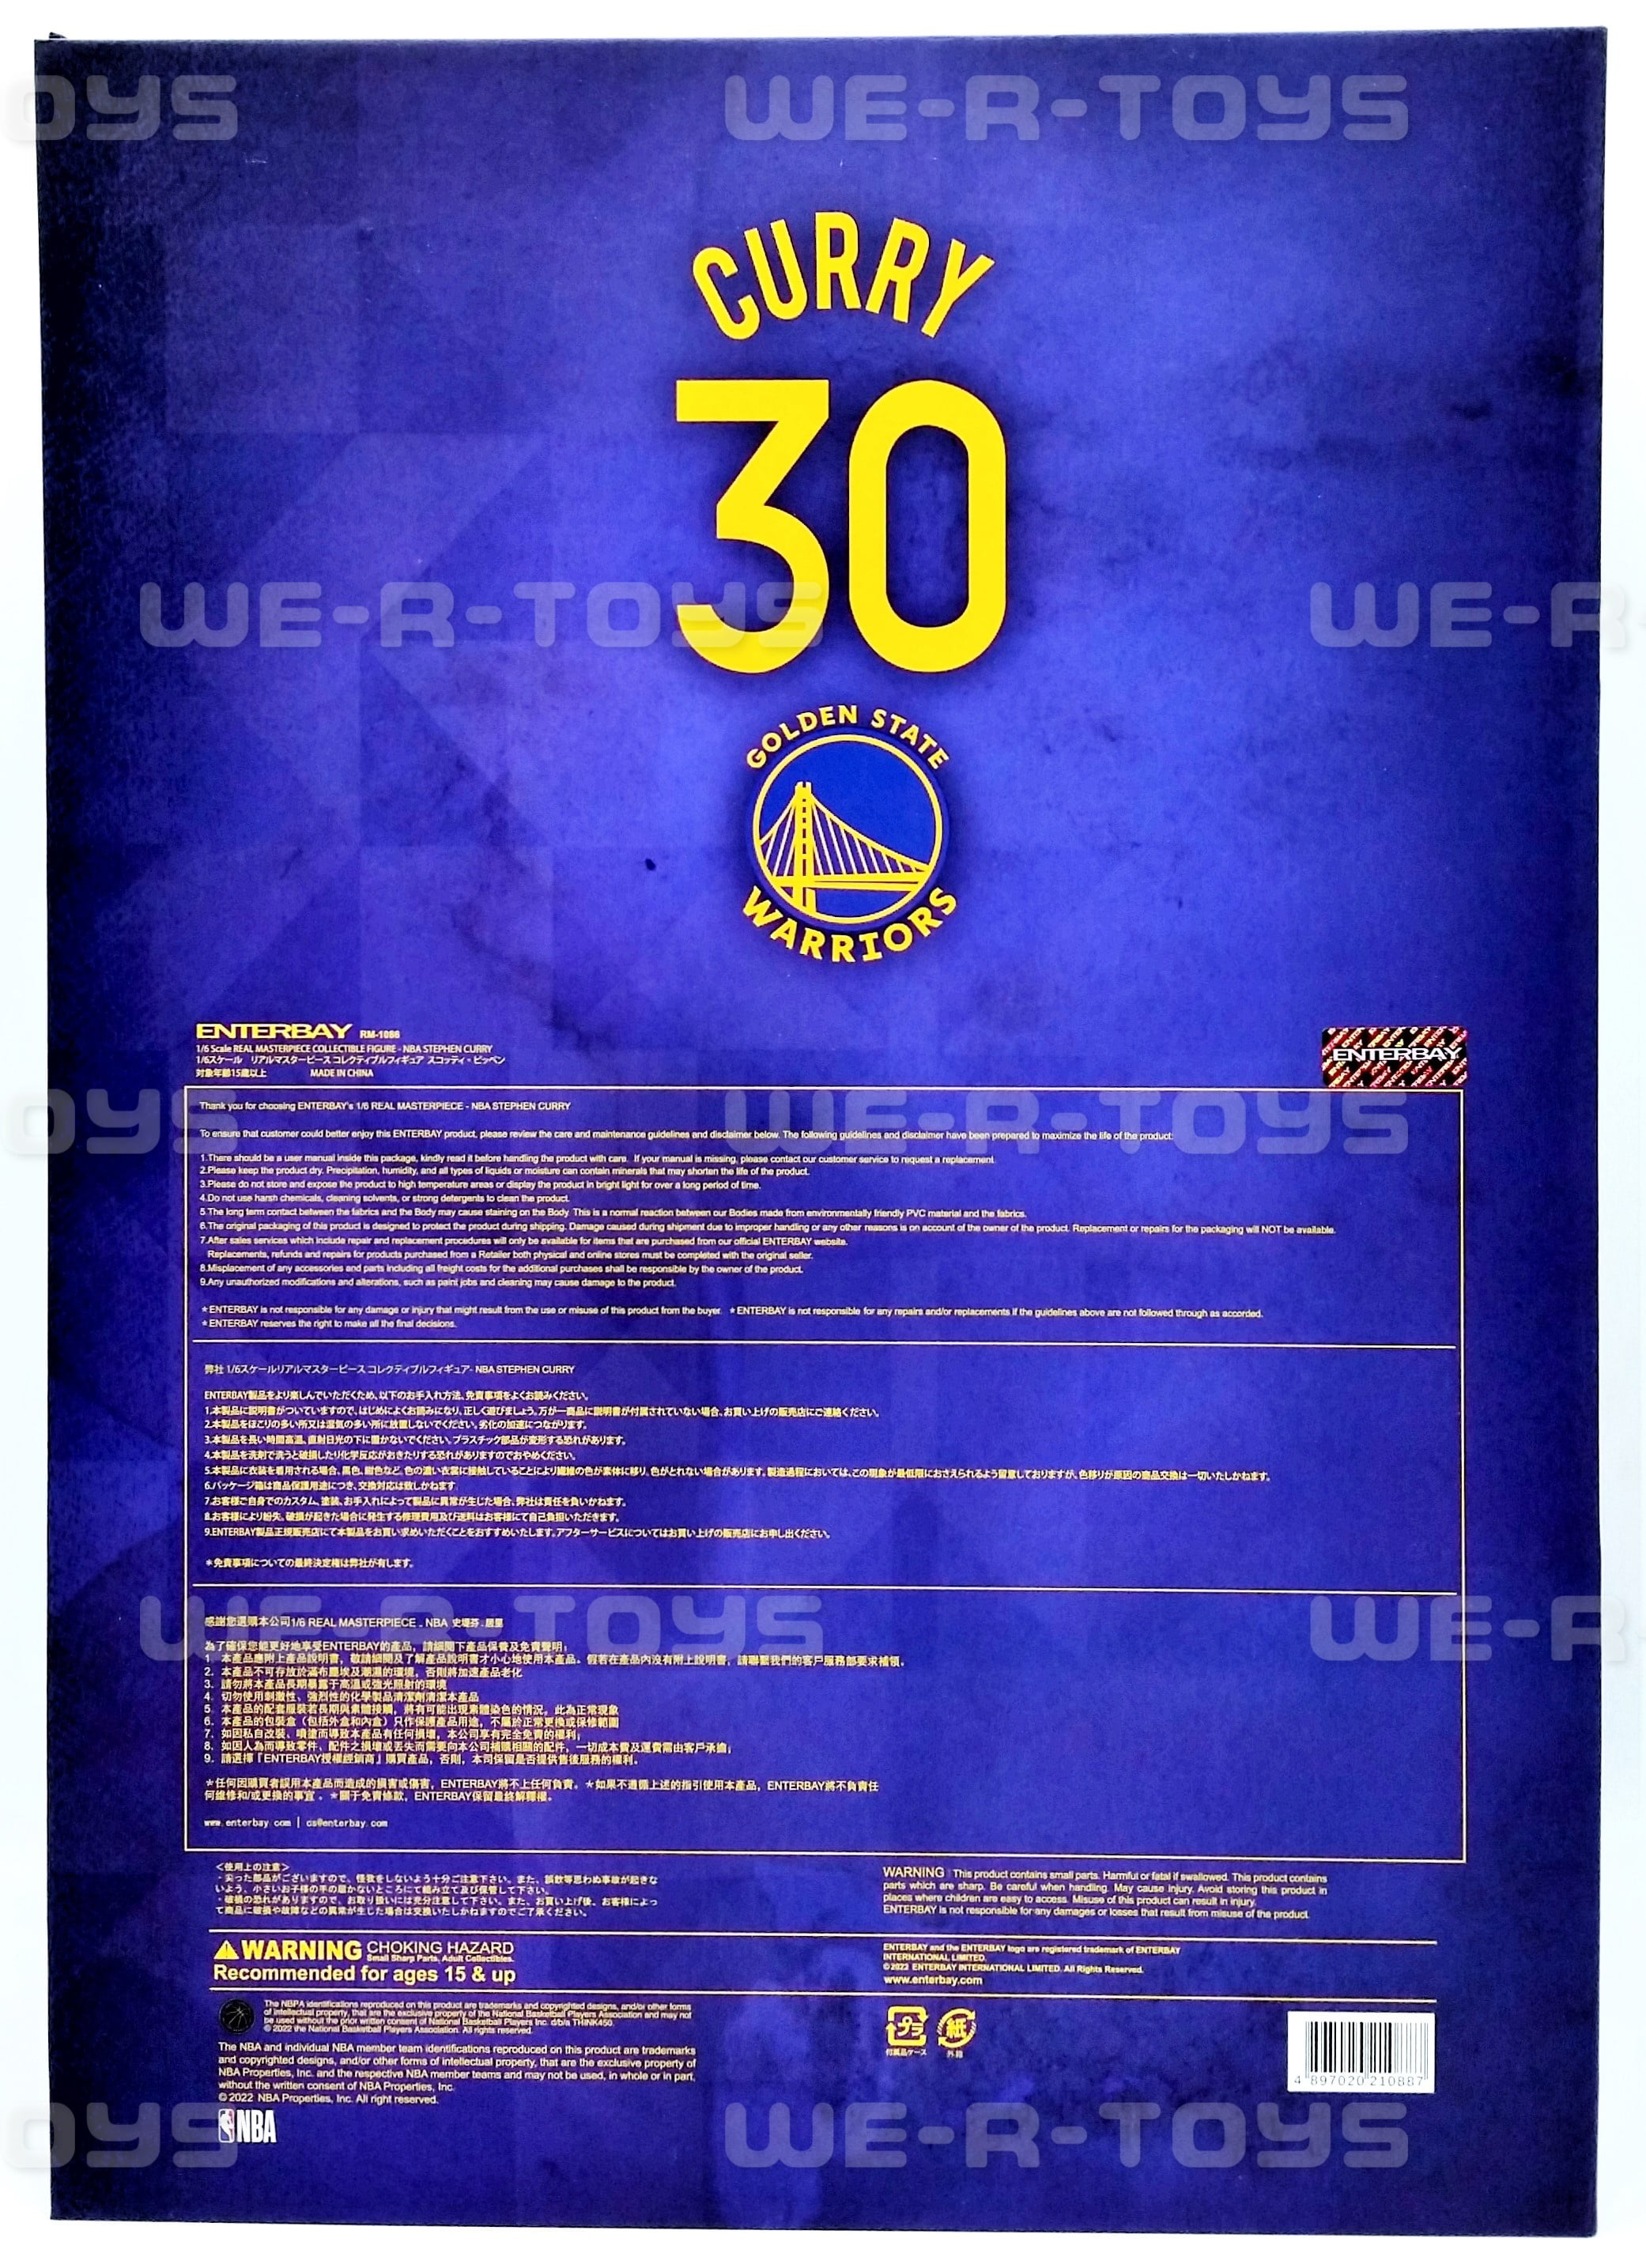 NBA Golden State Warriors Stephen Curry Real Masterpiece 1:6 Scale Action  Figure